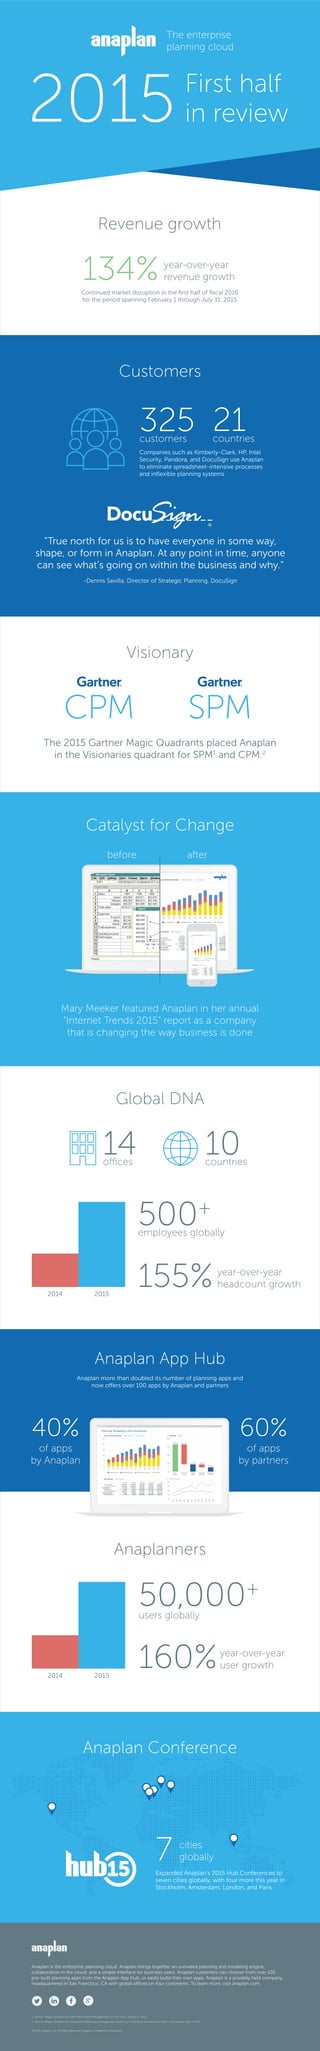 10
Global DNA
14offices countries
155%year-over-year
headcount growth
500+
employees globally
2014 2015
134%year-over-year
revenue growth
Continued market disruption in the ﬁrst half of ﬁscal 2016
for the period spanning February 1 through July 31, 2015
Visionary
Mary Meeker featured Anaplan in her annual
“Internet Trends 2015” report as a company
that is changing the way business is done
afterbefore
Catalyst for Change
Total Company
Contract Revenue
Top Line Revenue Summary
Jan
15
Feb
15
Mar
15
Apr
15
May
15
Jun
15
Jul
15
Aug
15
Sep
15
Oct
15
Nov
15
Dec
15
10M
15M
20M
0M
5M
25M
Q1 Forecast
Professional Services Monitoring Service Revenue Whole Sale
41,603,432
(30,508,255)
11,095,177
26.67%
(4,569,926)
6,525,250
15.68%
25,432,046
Q2 FY15Q1 FY15
(19,212,883)
6,219,162
24.45%
(4,423,624)
1,795,538
7.06%
TOTAL REVENUE
TOTAL COST OF SALES
Gross Margin %
OPERATING EXPENSES
Operating Margin %
64,222,830
24,482,280
52,234,900
76,717,180
76,717,180
76,717,180
76,967180
64,222,830
Q4 FY15Q3 FY15
19,910,220
40,816,660
60,726,880
60,726,880
60,949,280
80,000,000
64,222,830
24,482,280
52,234,900
76,717,180
76,717,180
76,717,180
76,967180
FY15
GROSS PROFIT
OPERATING INCOME
Total CompanyP&L Summary
Total Company
Contract Revenue
Top Line Revenue Summary
Jan
15
Feb
15
Mar
15
Apr
15
May
15
Jun
15
10M
15M
20M
0M
5M
25M
Professional Services
Monitoring Service Revenue Whole Sale
41,603,432
(30,508,255)
11,095,177
26.67%
(4,569,926)
6,525,250
15.68%
25,432,046
Q2 FY15Q1 FY15
(19,212,883)
6,219,162
24.45%
(4,423,624)
1,795,538
7.06%
TOTAL REVENUE
TOTAL COST OF SALES
Gross Margin %
OPERATING EXPENSES
Operating Margin %
GROSS PROFIT
OPERATING INCOME
Total CompanyP&L Summary
7 cities
globally
Expanded Anaplan’s 2015 Hub Conferences to
seven cities globally, with four more this year in
Stockholm, Amsterdam, London, and Paris
160%year-over-year
user growth
50,000+
users globally
Anaplan Conference
60%
of apps
by partners
40%
of apps
by Anaplan
Anaplan more than doubled its number of planning apps and
now offers over 100 apps by Anaplan and partners
41,603,432
(30,508,255)
11,095,177
26.67%
(4,569,926)
6,525,250
15.68%
25,432,046
Q2 FY15Q1 FY15
(19,212,883)
6,219,162
24.45%
(4,423,624)
1,795,538
7.06%
TOTAL REVENUE
TOTAL COST OF SALES
Gross Margin %
OPERATING EXPENSES
Operating Margin %
64,222,830
24,482,280
52,234,900
76,717,180
76,717,180
76,717,180
76,967180
64,222,830
Q4 FY15Q3 FY15
19,910,220
40,816,660
60,726,880
60,726,880
60,949,280
80,000,000
64,222,830
24,482,280
52,234,900
76,717,180
76,717,180
76,717,180
76,967180
FY15
TOTAL REVENUE
GROSS PROFIT
OPERATING INCOME
Jan
15
Feb
15
Mar
15
Apr
15
May
15
Jun
15
Jul
15
Aug
15
Sep
15
Oct
15
Nov
15
Dec
15
10M
15M
20M
0M
5M
TOTAL
REVENUE
TOTAL COST
OF SALES
GROSS
PROFIT
OPERATING
EXPENSES
OPERATING
INCOME
100M
150M
165,997,932 -121,221,021
44,778,910
26,569,316
-18,207,594
200M
0M
50M
Total Company
Contract Revenue
Top Line Revenue Summary
Jan
15
Feb
15
Mar
15
Apr
15
May
15
Jun
15
Jul
15
Aug
15
Sep
15
Oct
15
Nov
15
Dec
15
10M
15M
20M
0M
5M
25M
Group KPIs FY15Q1 Forecast
Total CompanyP&L Summary
Planning, Budgeting, and Forecasting
Professional Services Monitoring Service Revenue Whole Sale
2014 2015
The enterprise
planning cloud
2015First half
in review
Revenue growth
Anaplan App Hub
Anaplanners
The 2015 Gartner Magic Quadrants placed Anaplan
in the Visionaries quadrant for SPM1
and CPM.2
CPM SPM
Anaplan is the enterprise planning cloud. Anaplan brings together an unrivaled planning and modeling engine,
collaboration in the cloud, and a simple interface for business users. Anaplan customers can choose from over 100
pre-built planning apps from the Anaplan App Hub, or easily build their own apps. Anaplan is a privately held company,
headquartered in San Francisco, CA with global offices on four continents. To learn more, visit anaplan.com.
© 2015 Anaplan, Inc. All Rights Reserved. Anaplan Conﬁdential Information
1. Gartner “Magic Quadrant for Sales Performance Management” by Tad Travis, January 6, 2015.
2. Gartner “Magic Quadrant for Corporate Performance Management Suites” by Christopher Iervolino and John E. Van Decker, April 2, 2015.
“True north for us is to have everyone in some way,
shape, or form in Anaplan. At any point in time, anyone
can see what’s going on within the business and why.”
-Dennis Sevilla, Director of Strategic Planning, DocuSign
325customers
21countries
Companies such as Kimberly-Clark, HP, Intel
Security, Pandora, and DocuSign use Anaplan
to eliminate spreadsheet-intensive processes
and inﬂexible planning systems
Customers
 